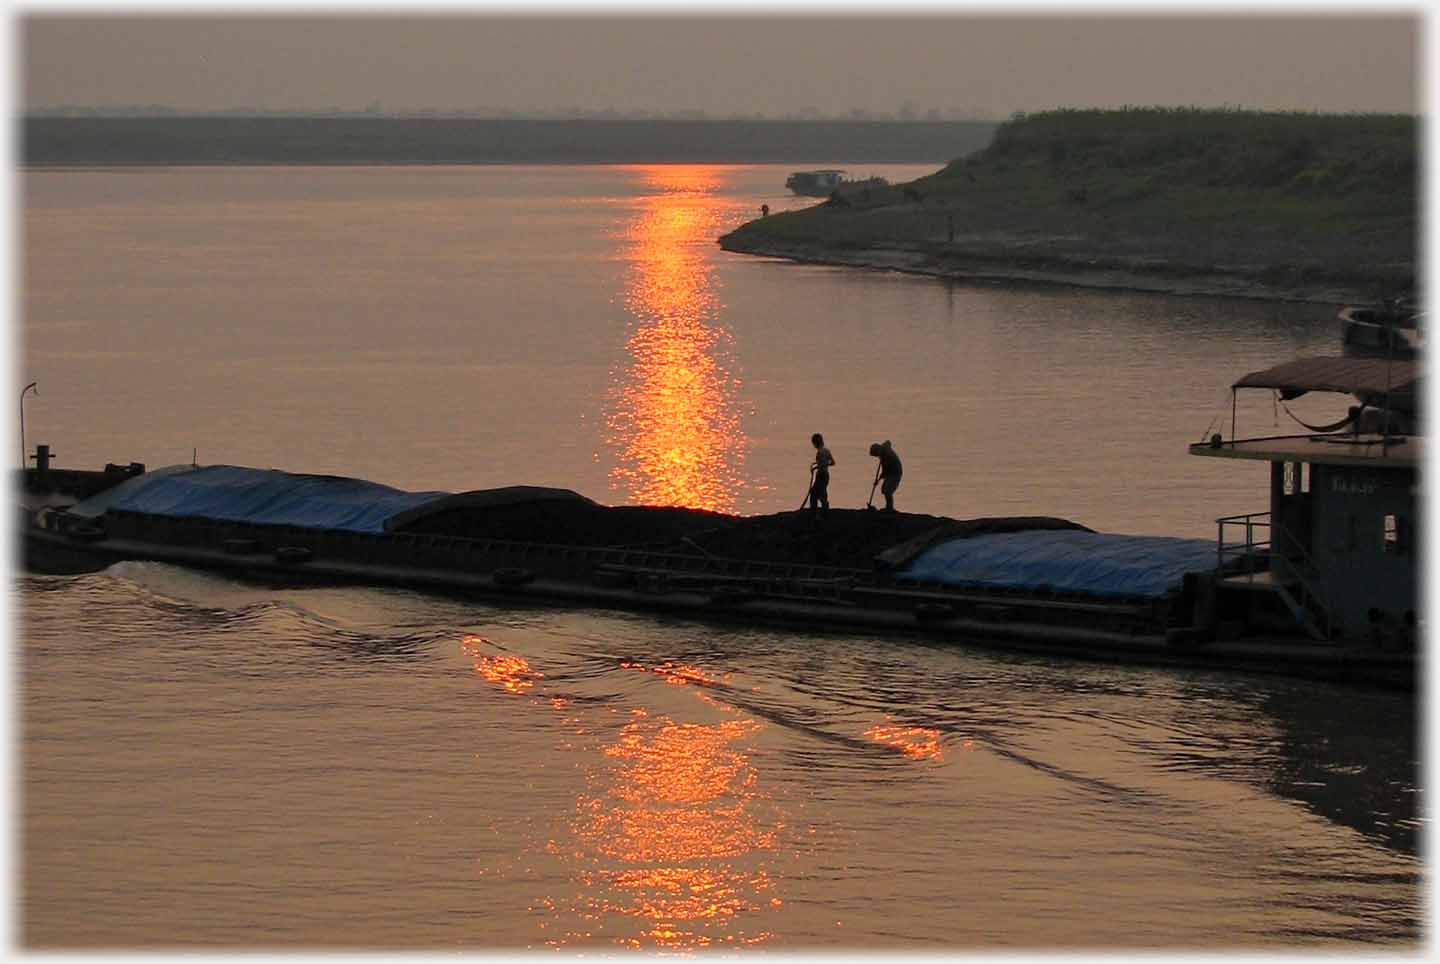 Two men working on heaps of material on barge, making small waves, with sun setting beyond.